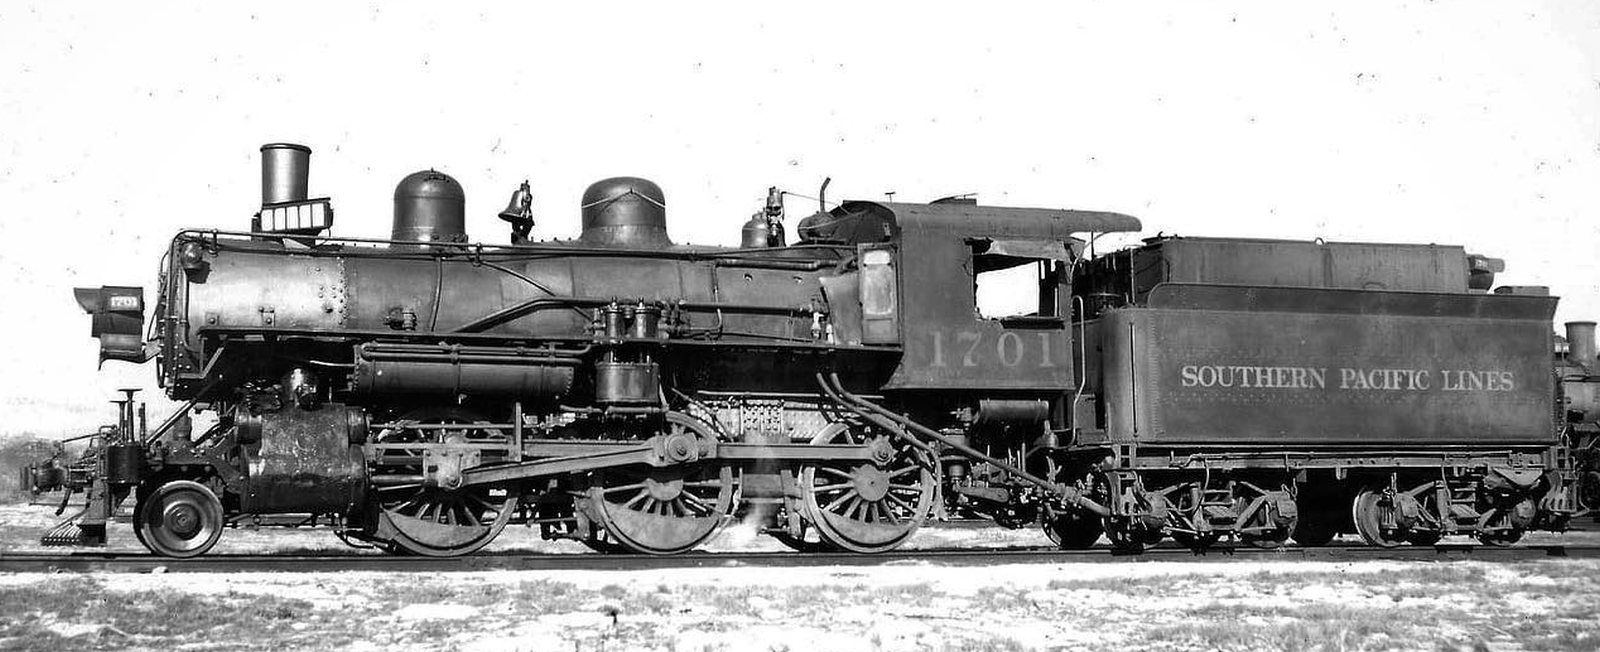 No. 1701 in May 1935 in Los Angeles